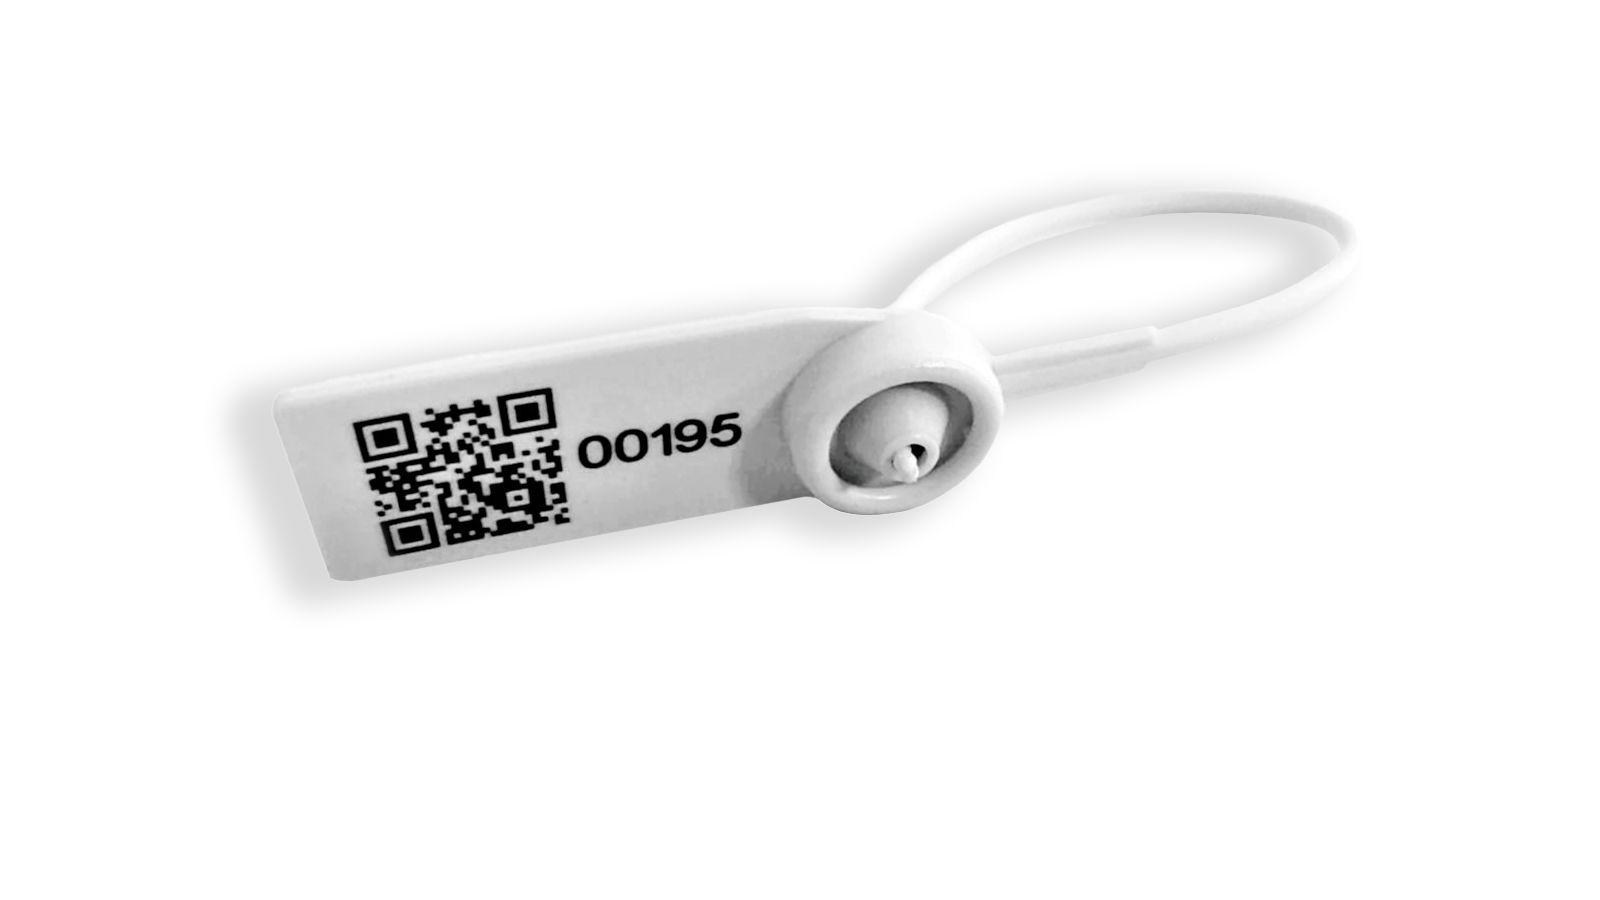 Plastic clamp seal with a unique code - white